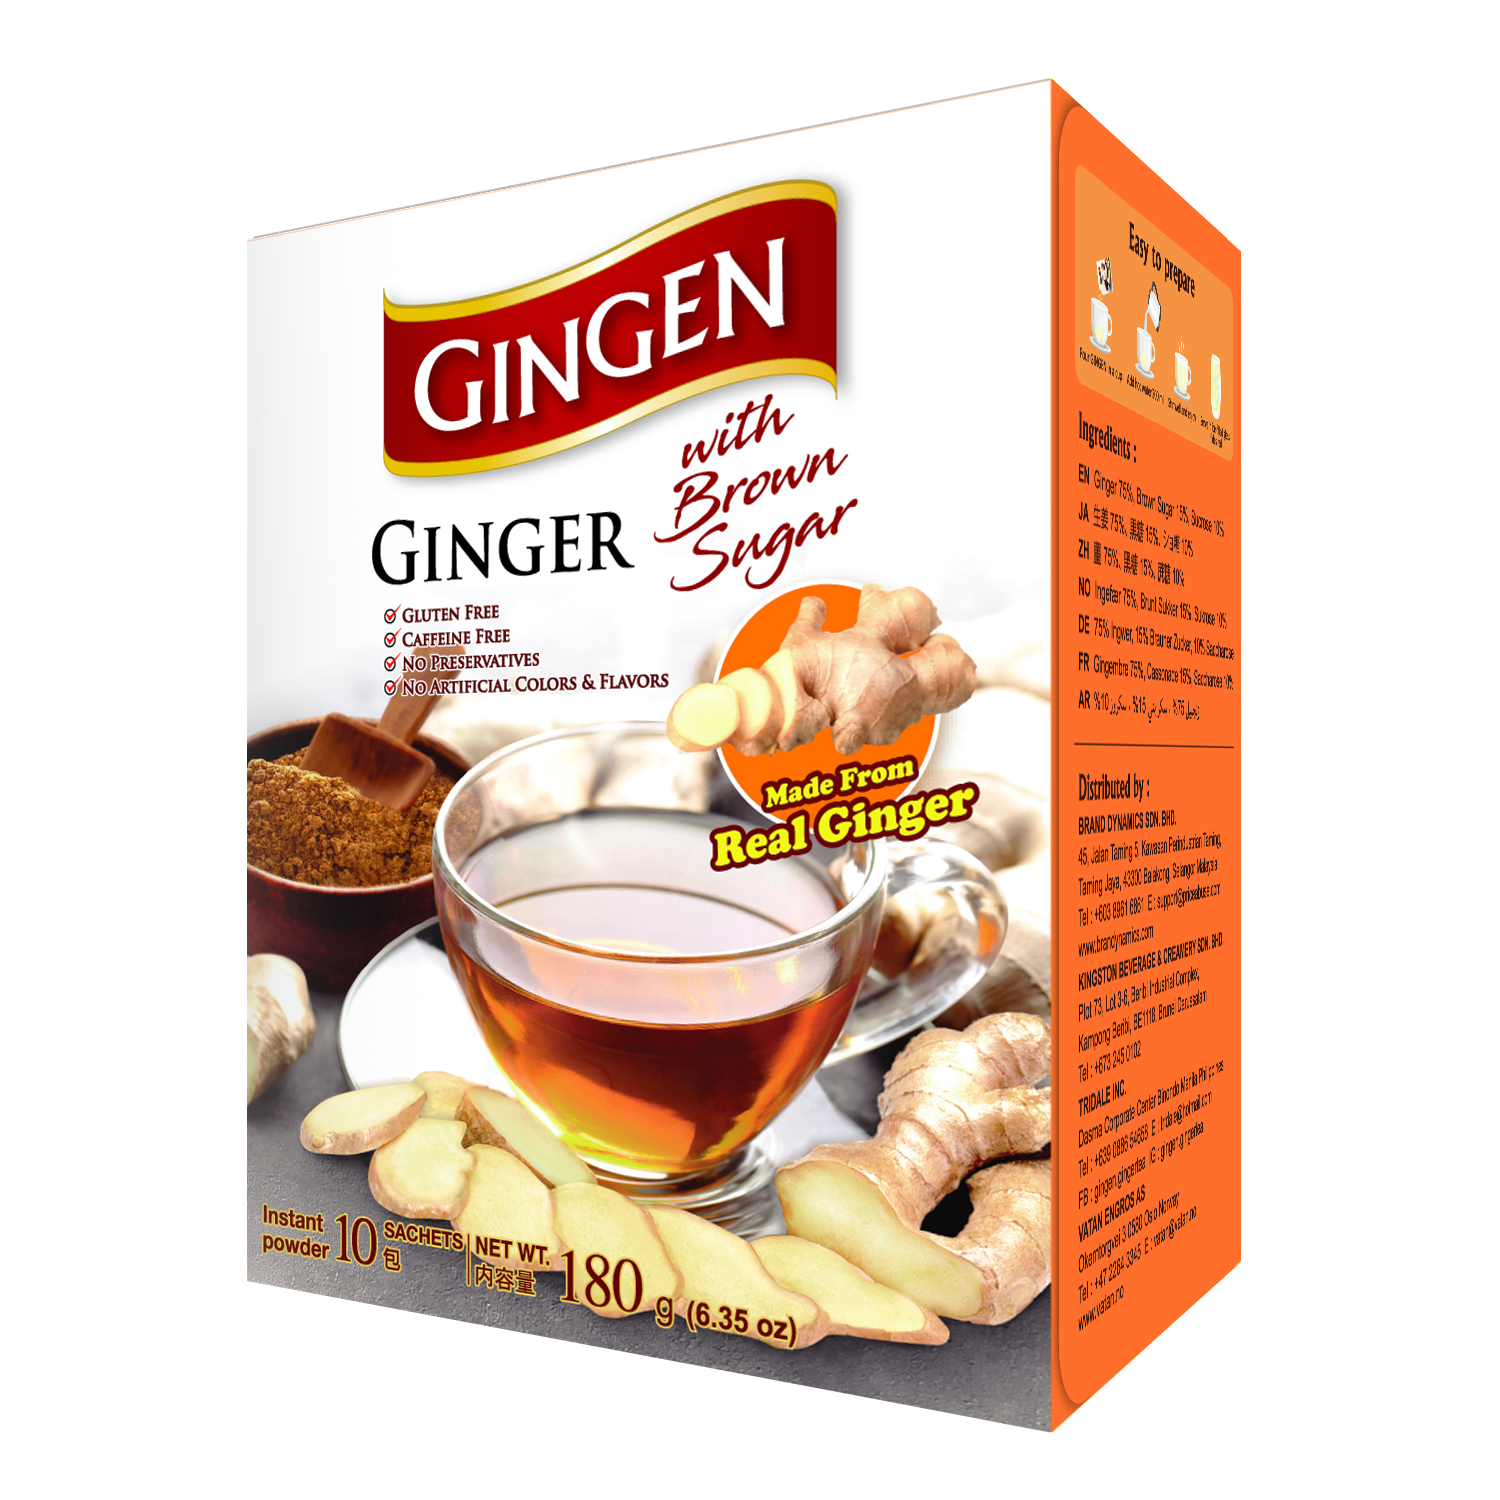 “GINGEN” INSTANT GINGER WITH BROWN SUGAR